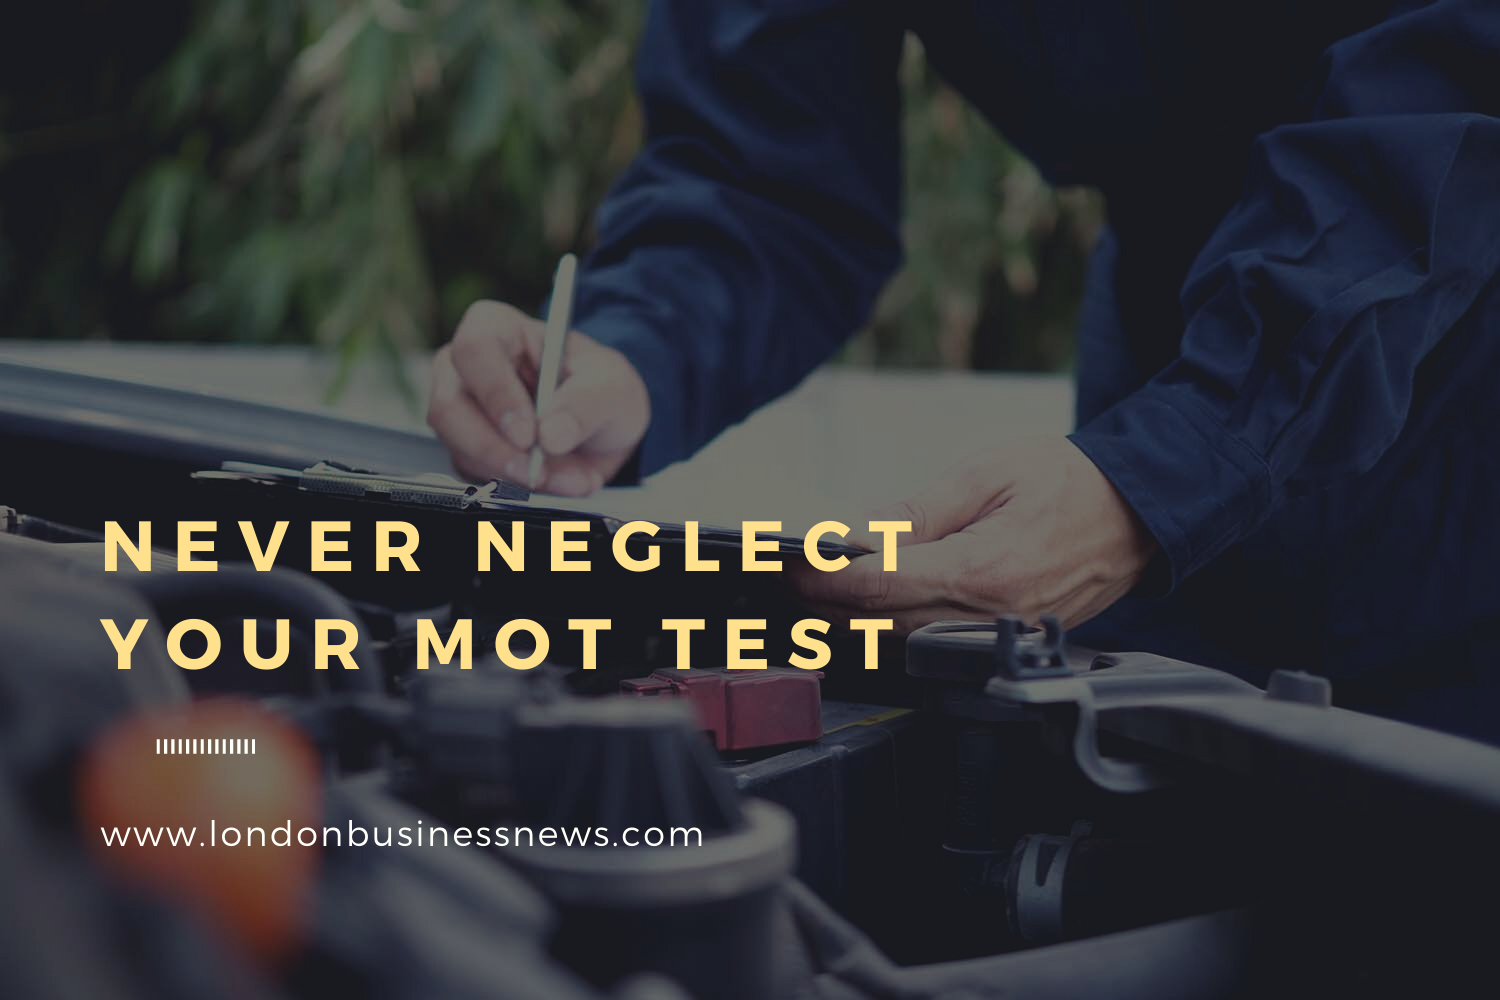 Reasons to Never Neglect Your MOT Test